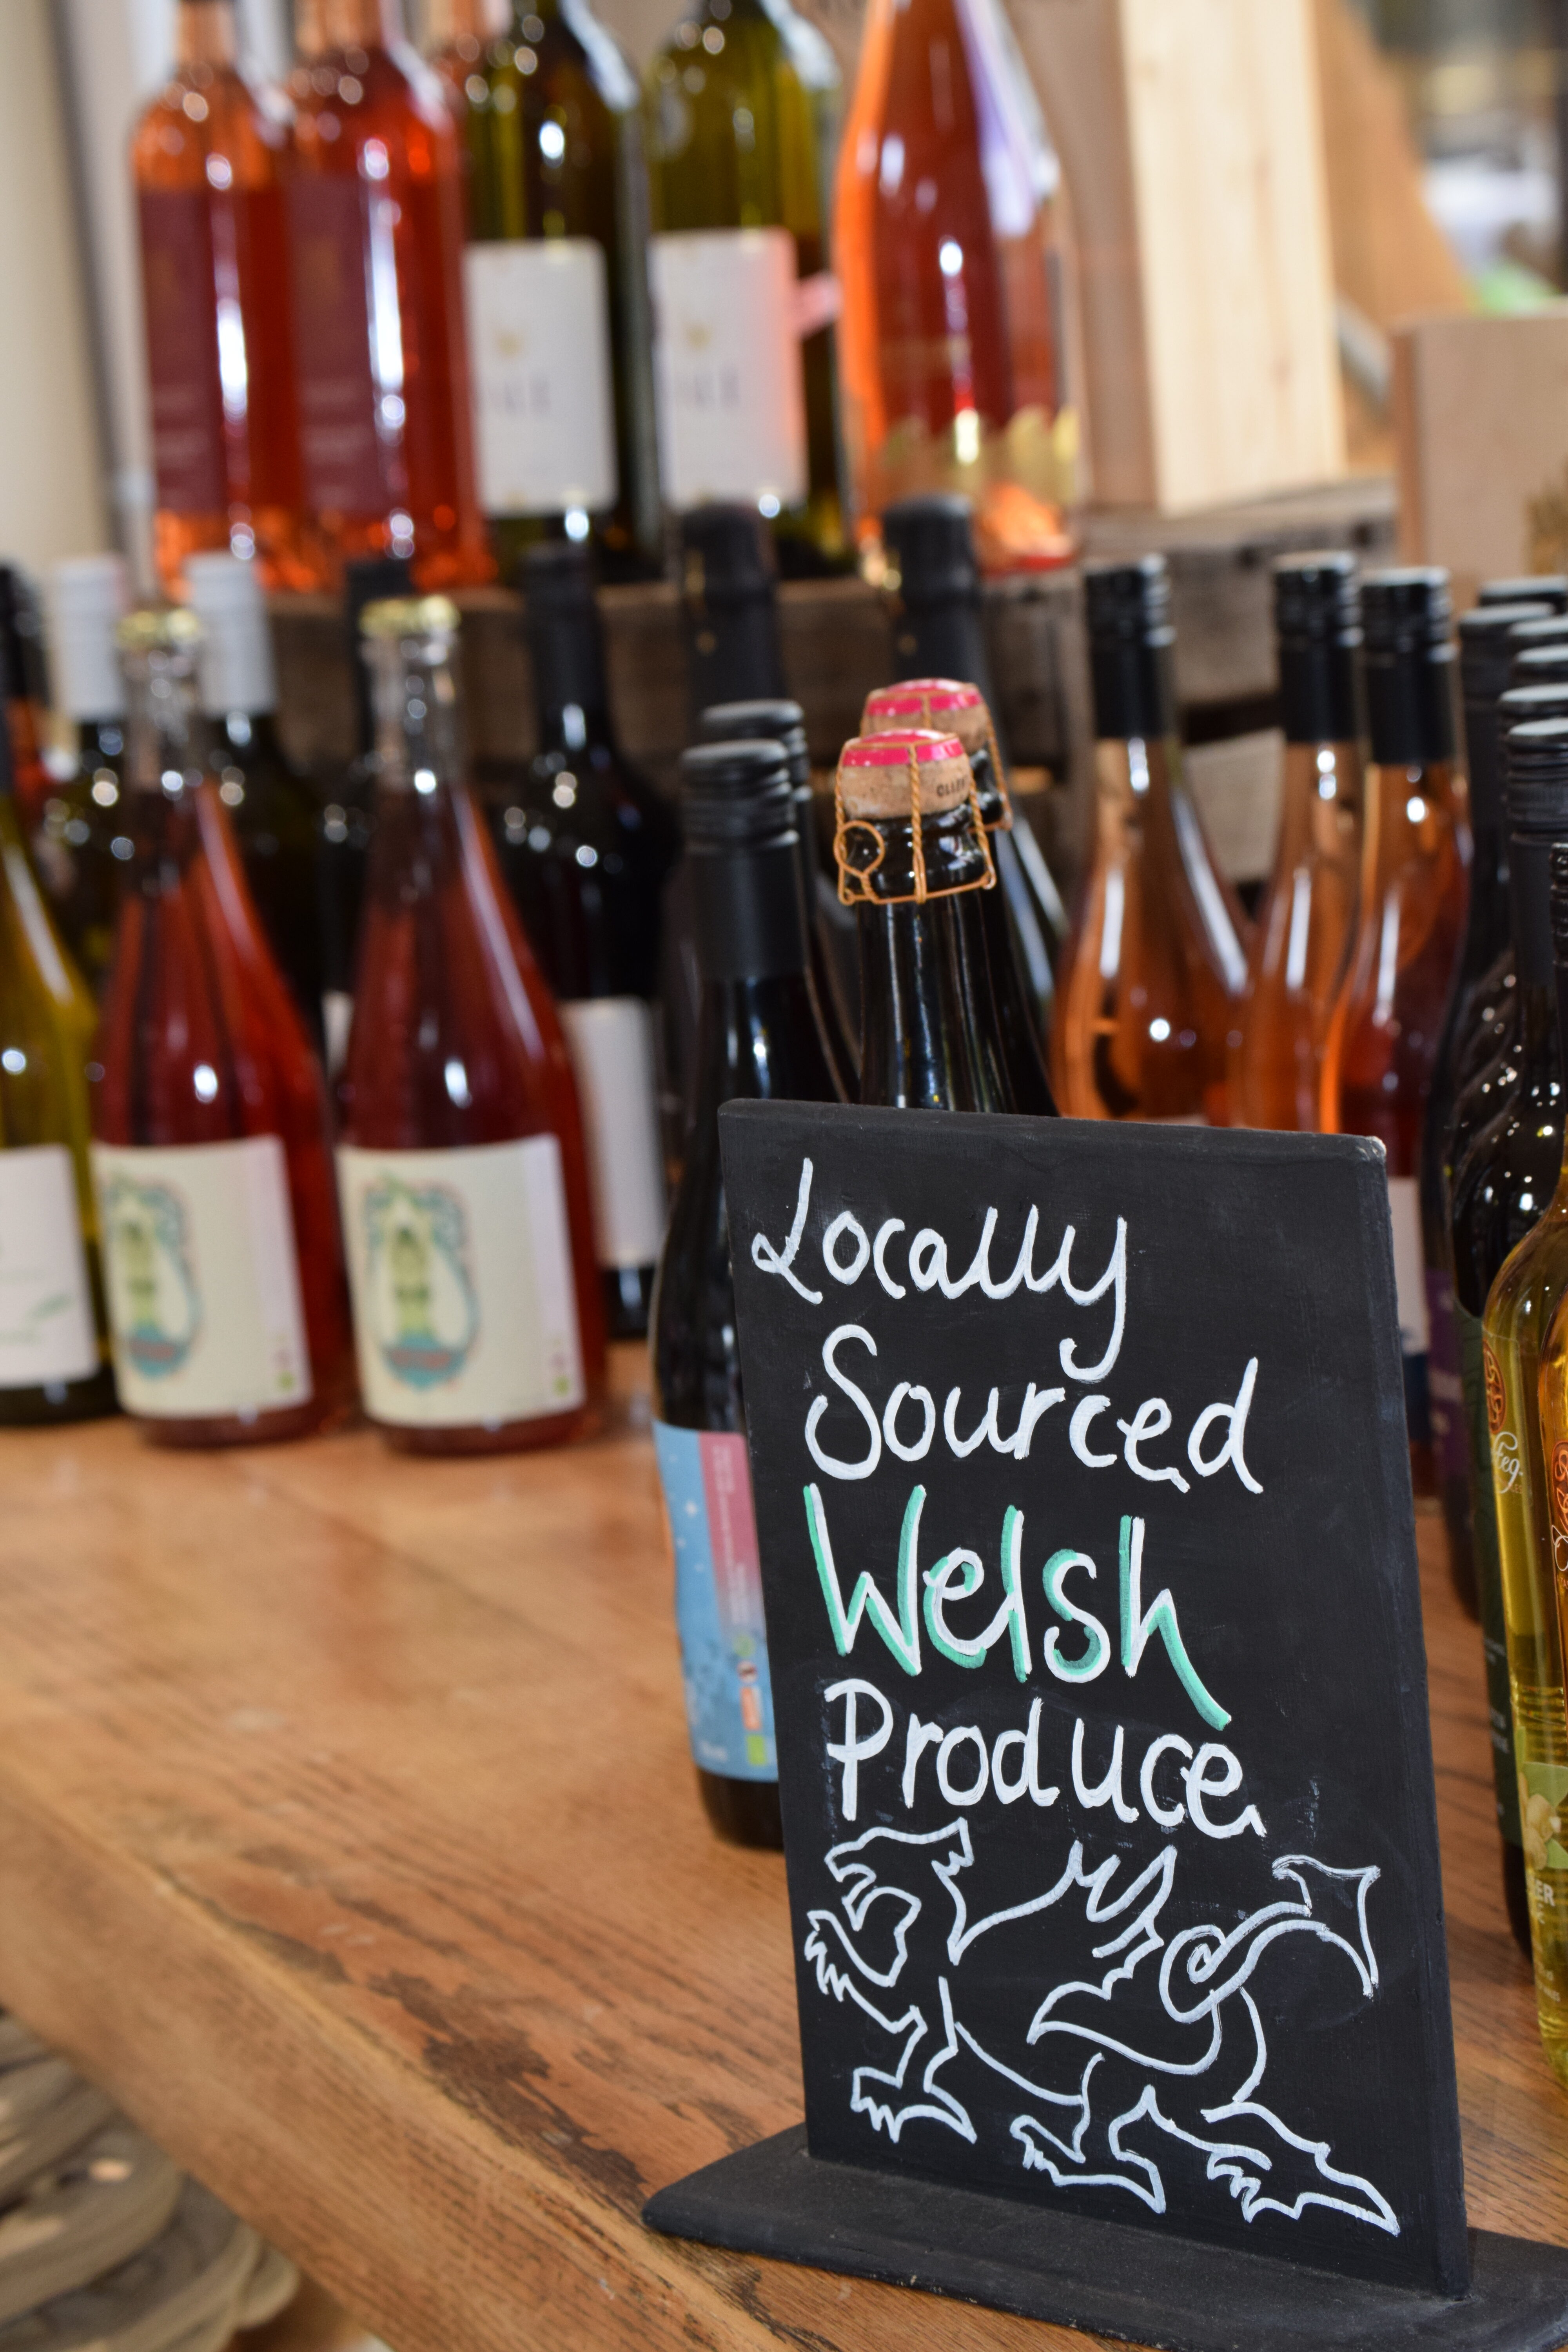 Locally Sourced Welsh Wines